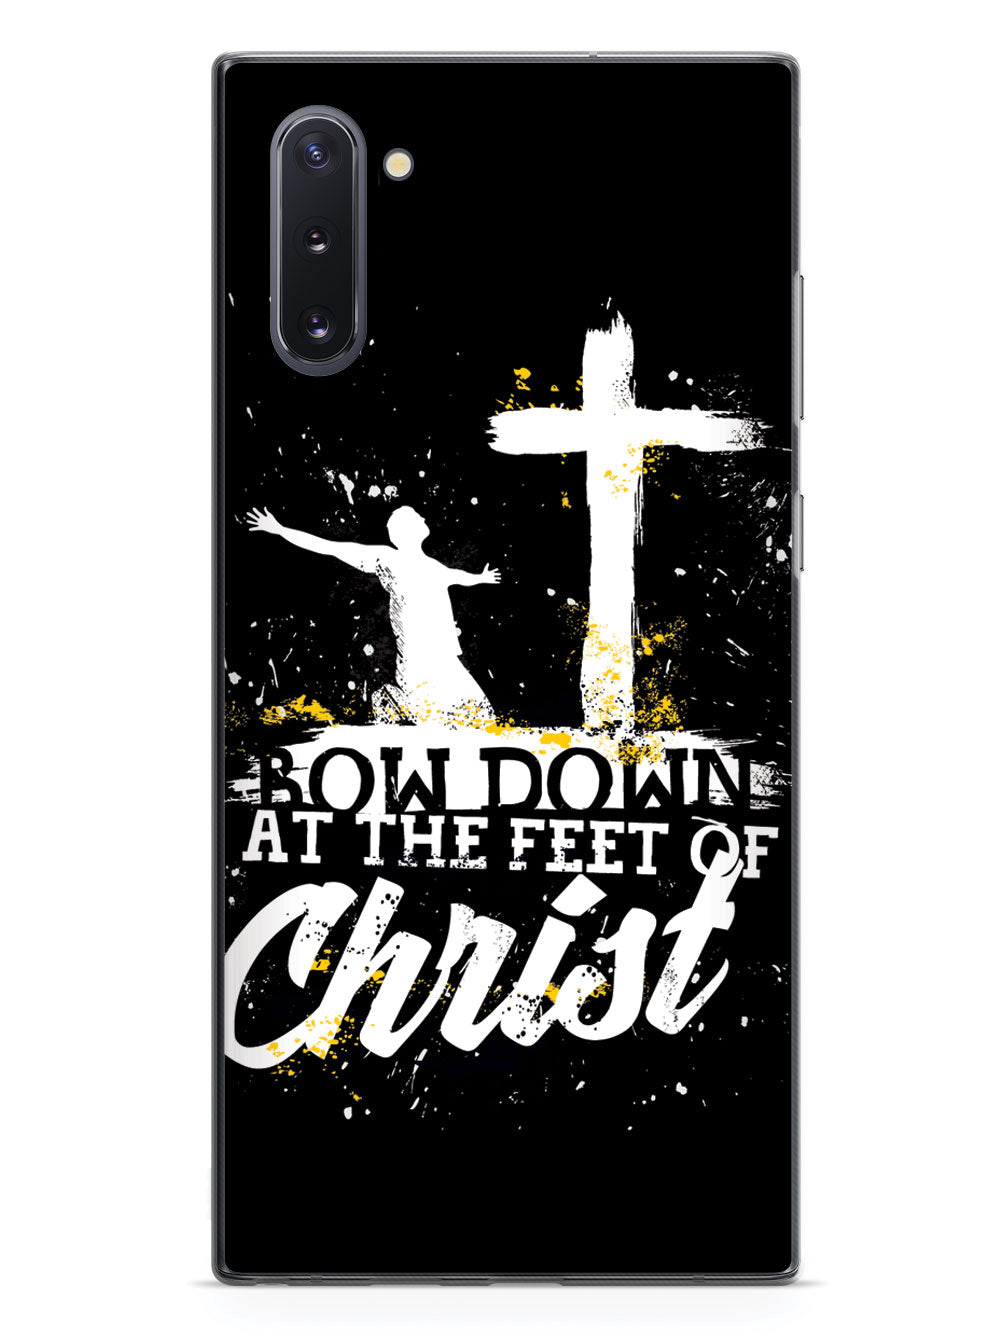 Bow Down At The Feet Of Christ - Black Case